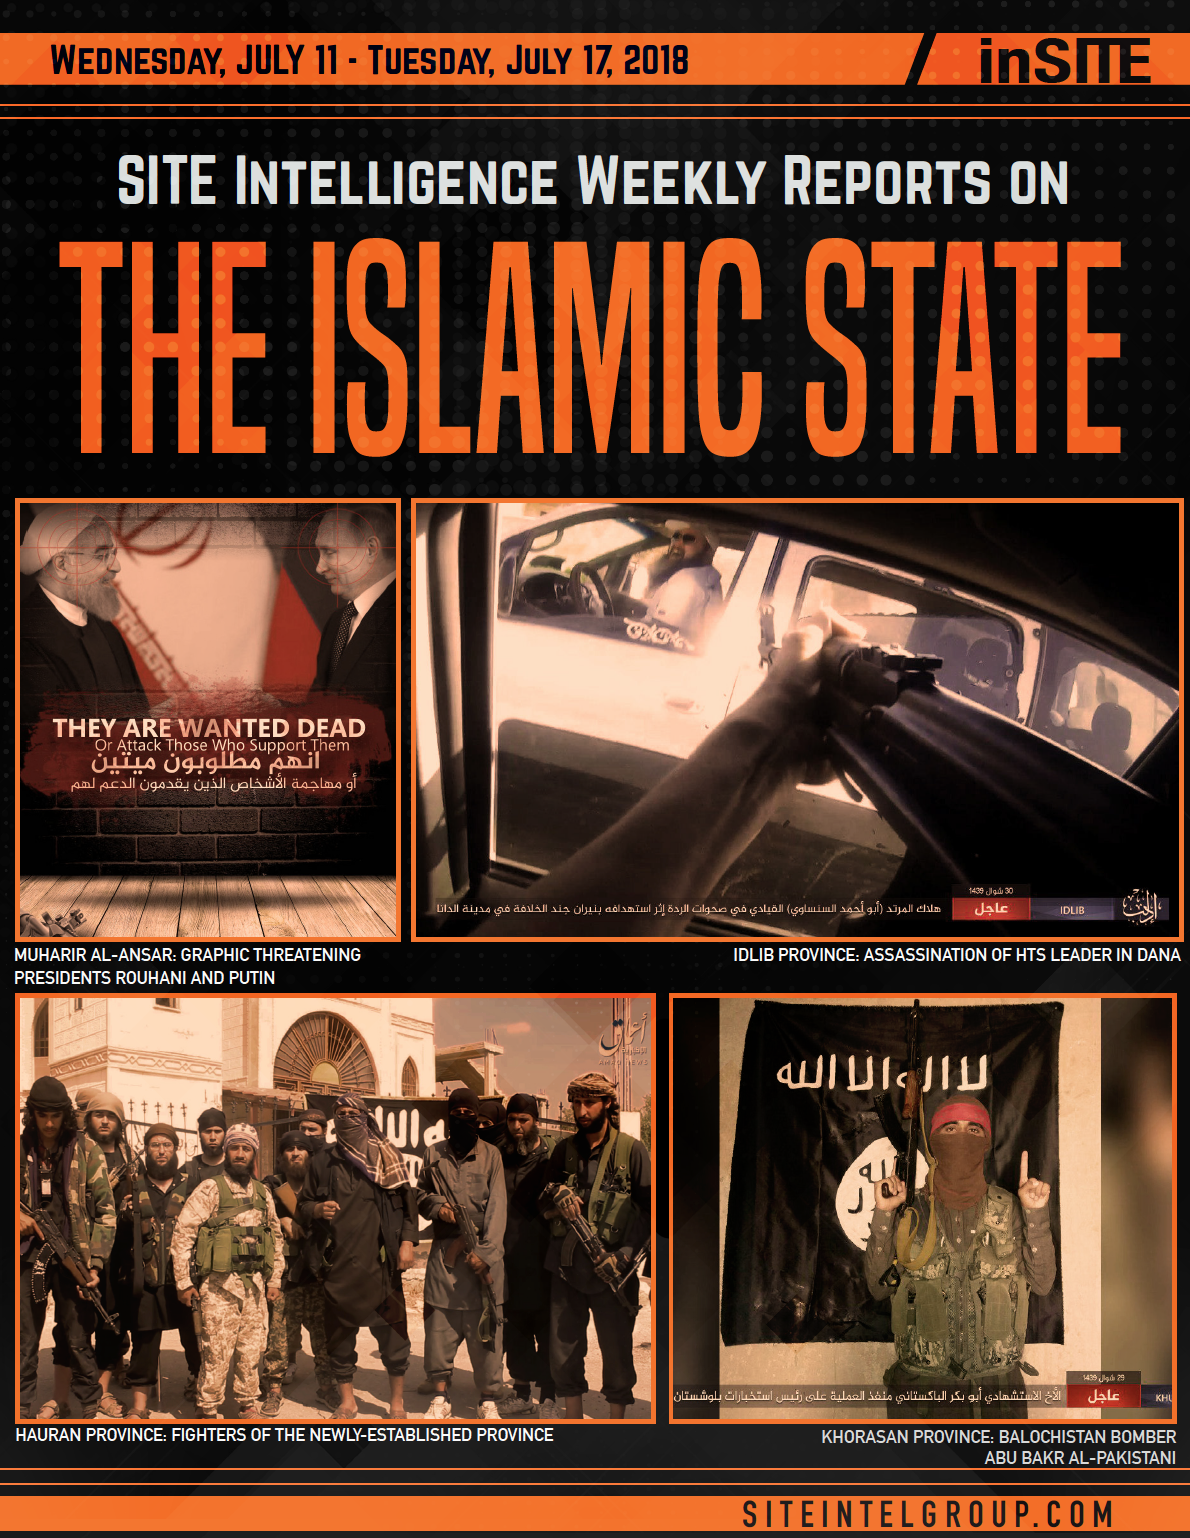 Weekly inSITE on the Islamic State for July 11-17, 2018